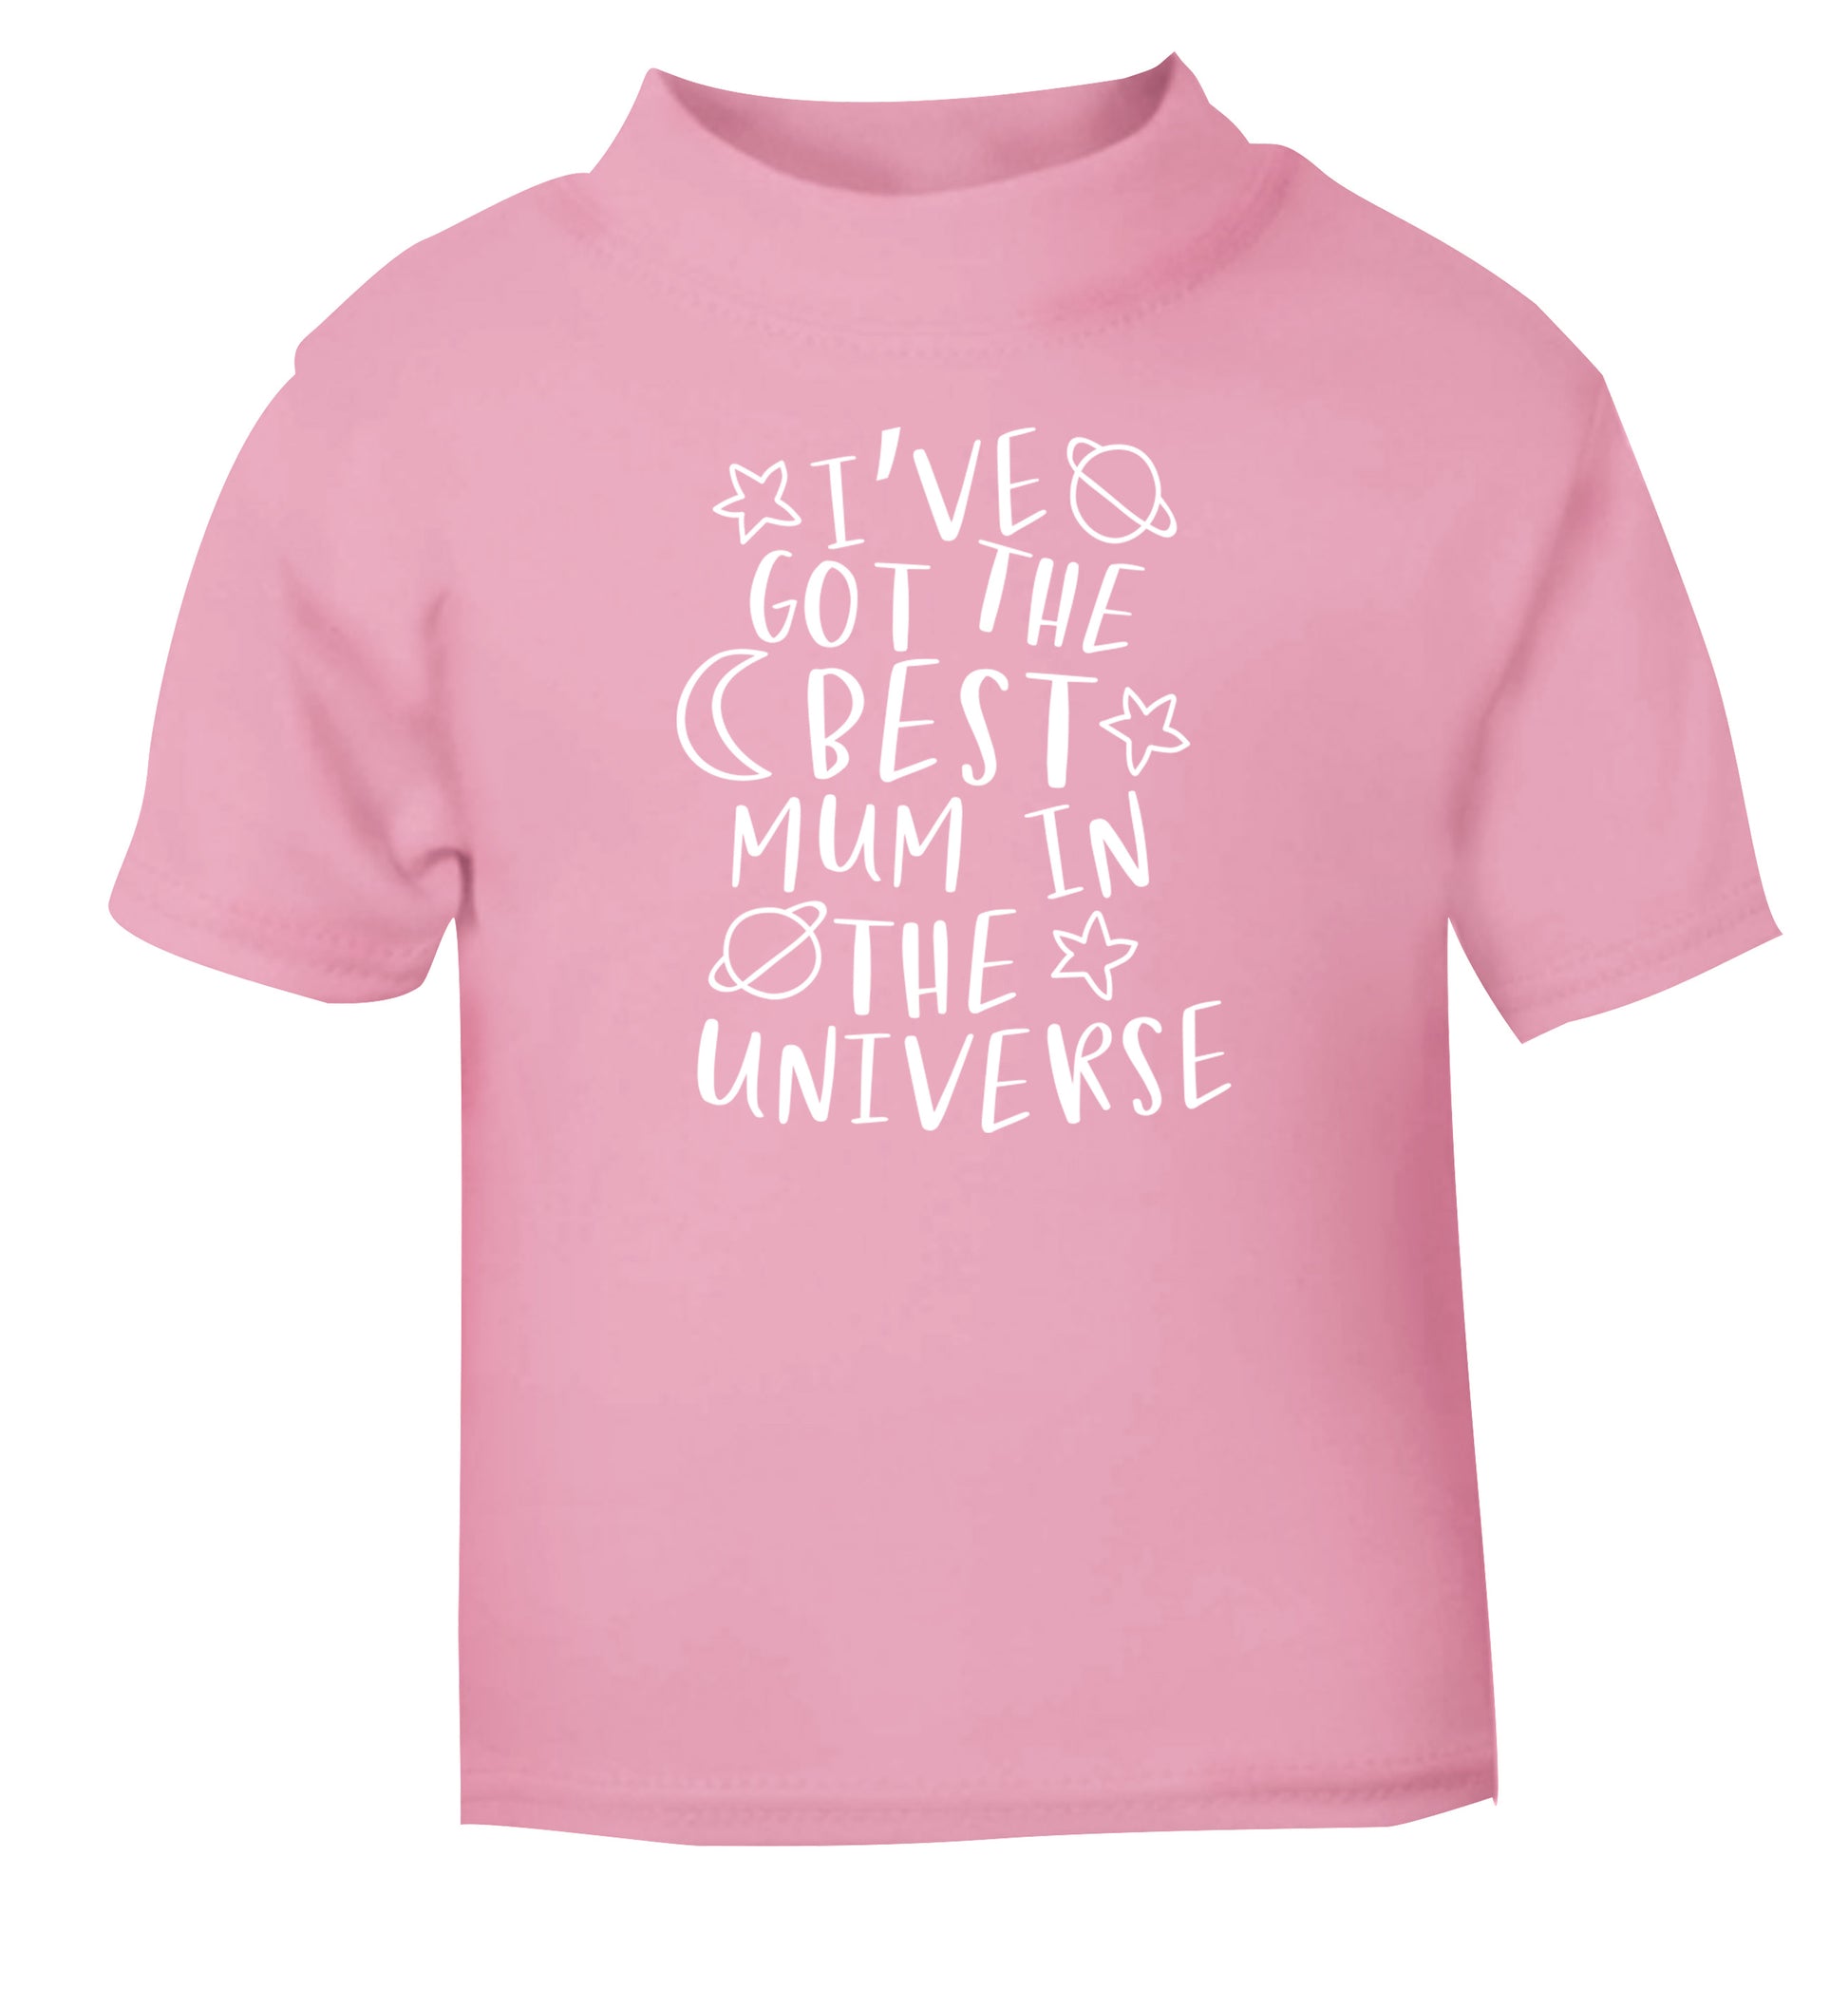 I've got the best mum in the universe light pink baby toddler Tshirt 2 Years